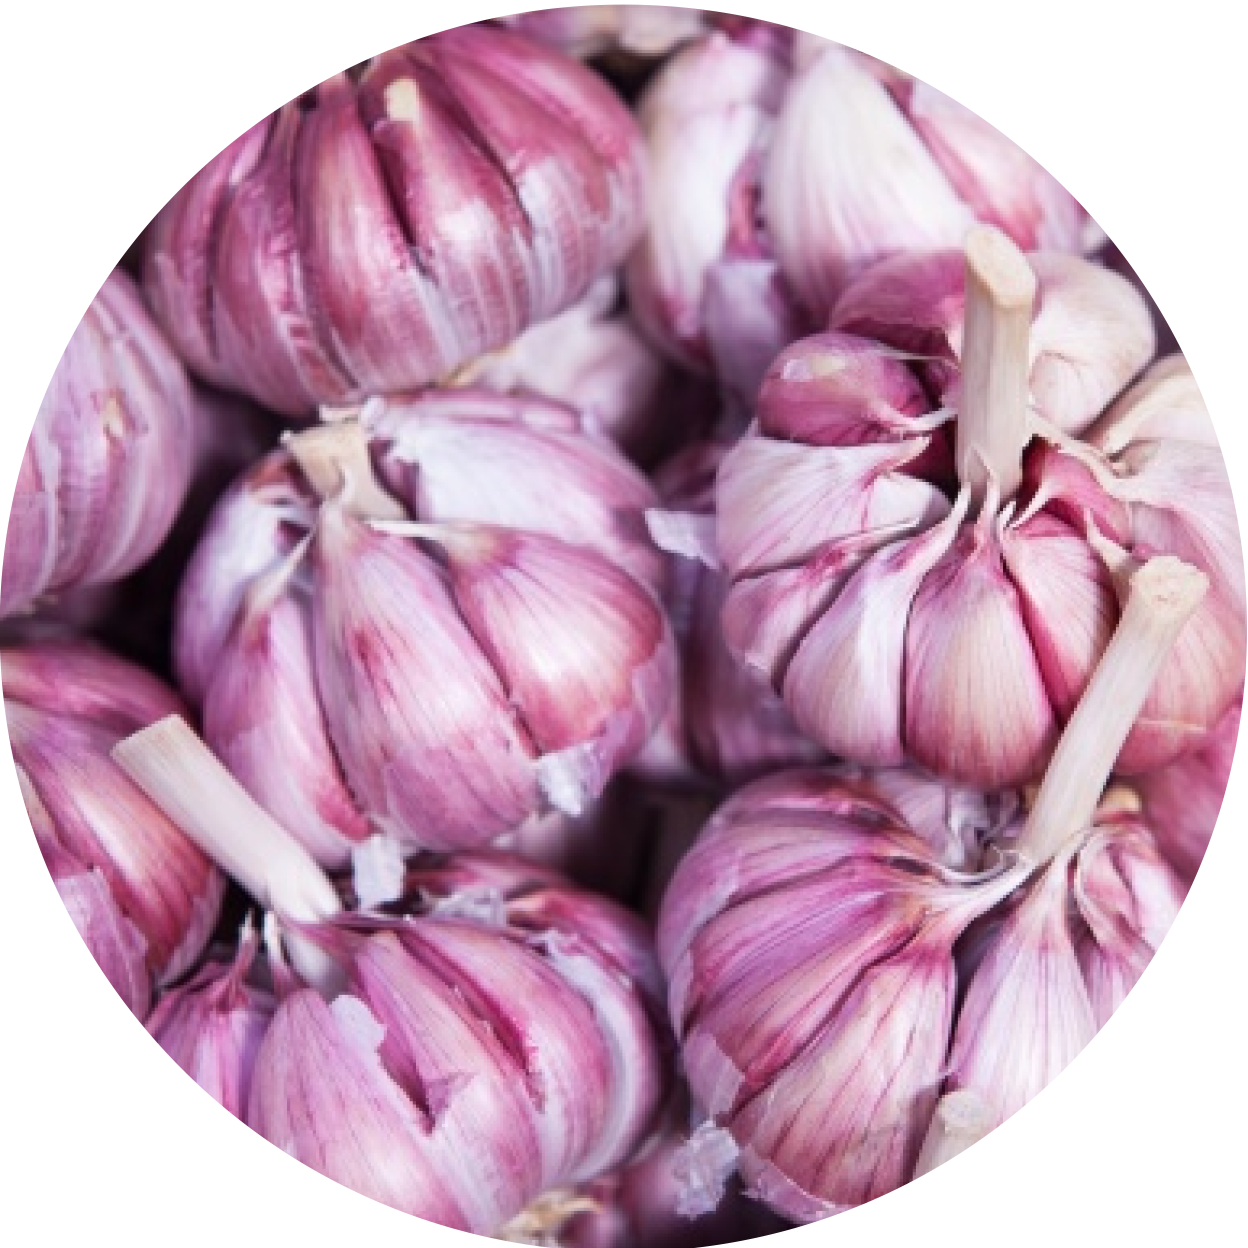 Garlic - 6 Natural Pain Relievers You Can Try At Home